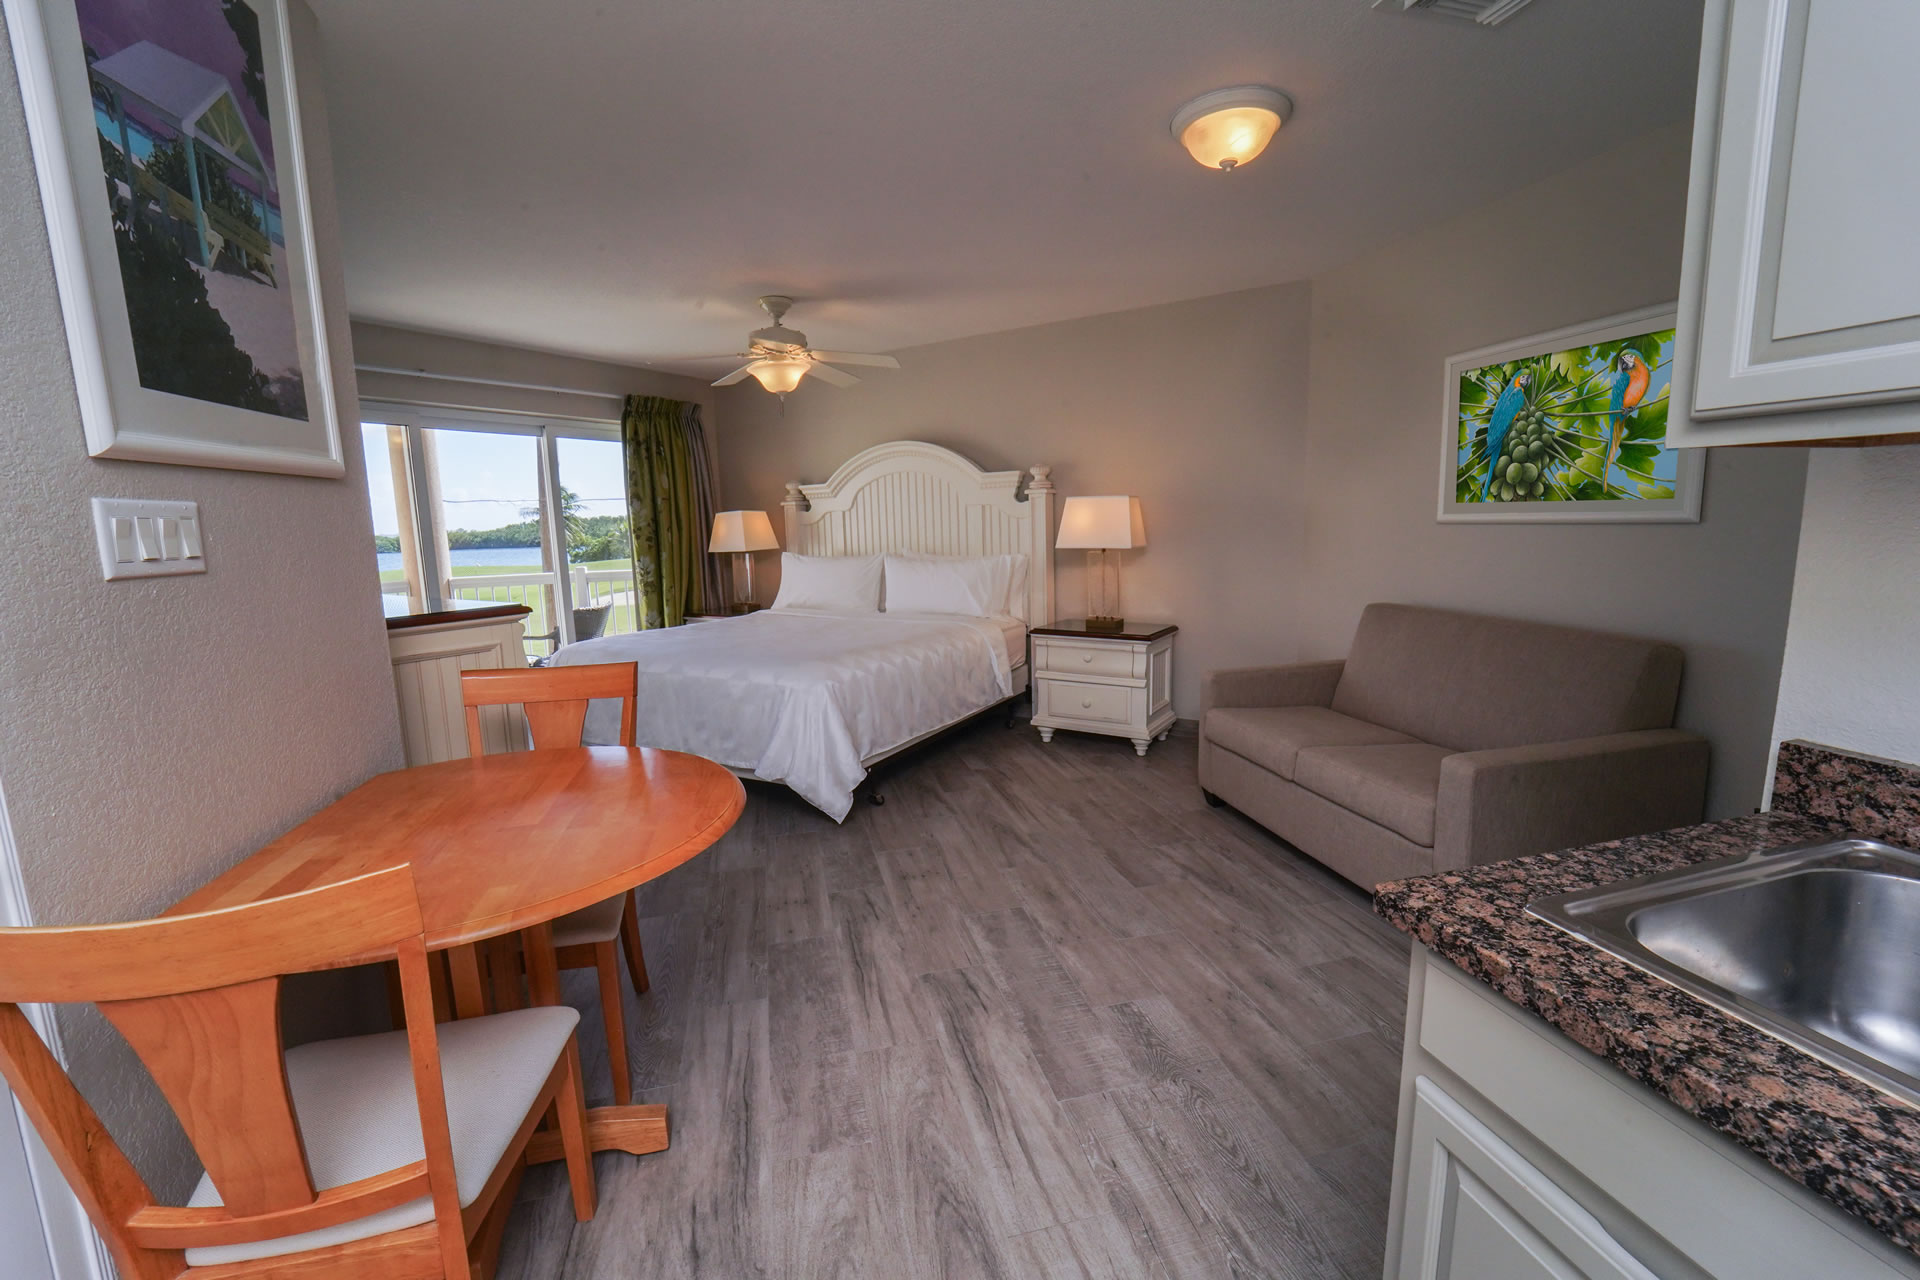 Queen bed, sleeper sofa, dining table, kitchen sink, and sunny balcony facing the golf course in the One Queen Bed Studio Suite with Sleeper Sofa at the Grand Caymanian Resort.